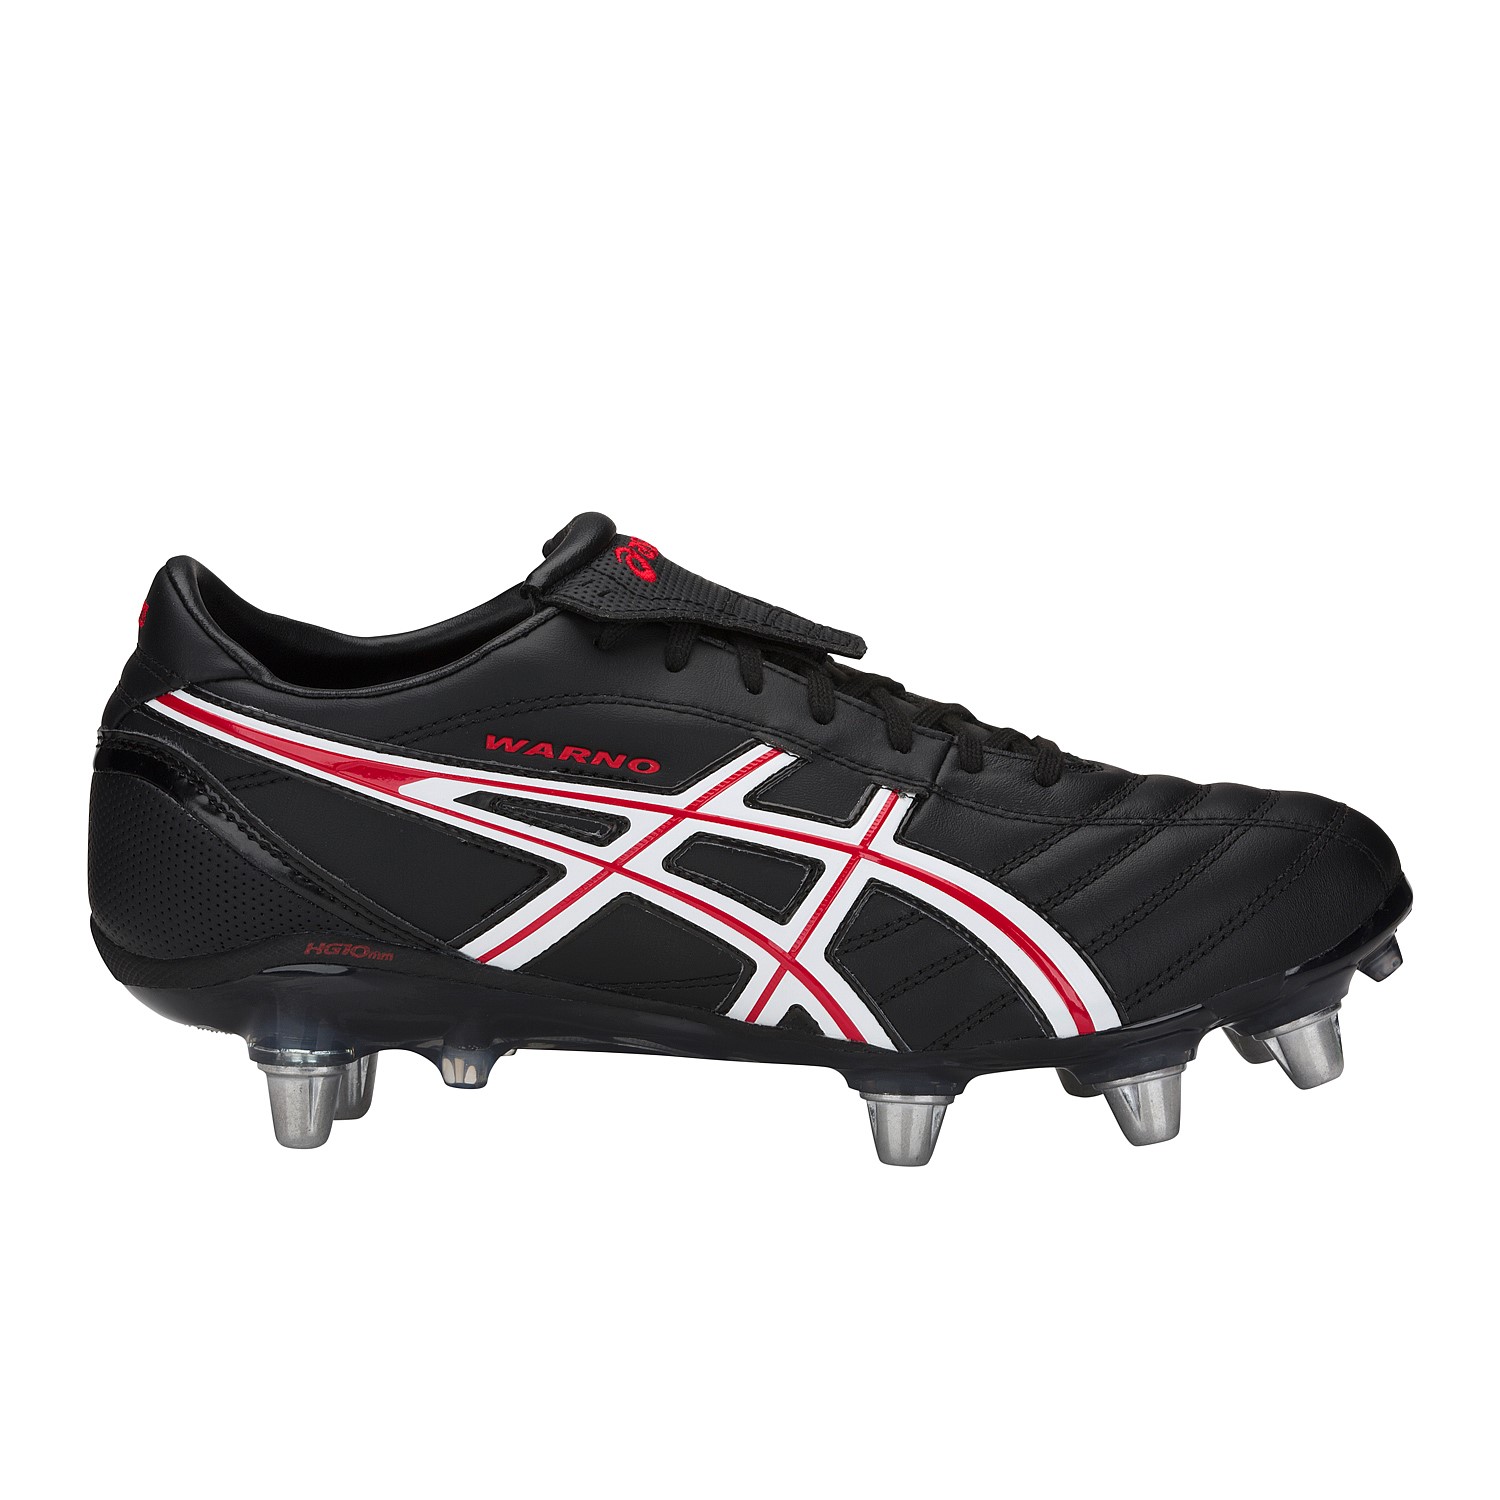 asics rugby boots 2018